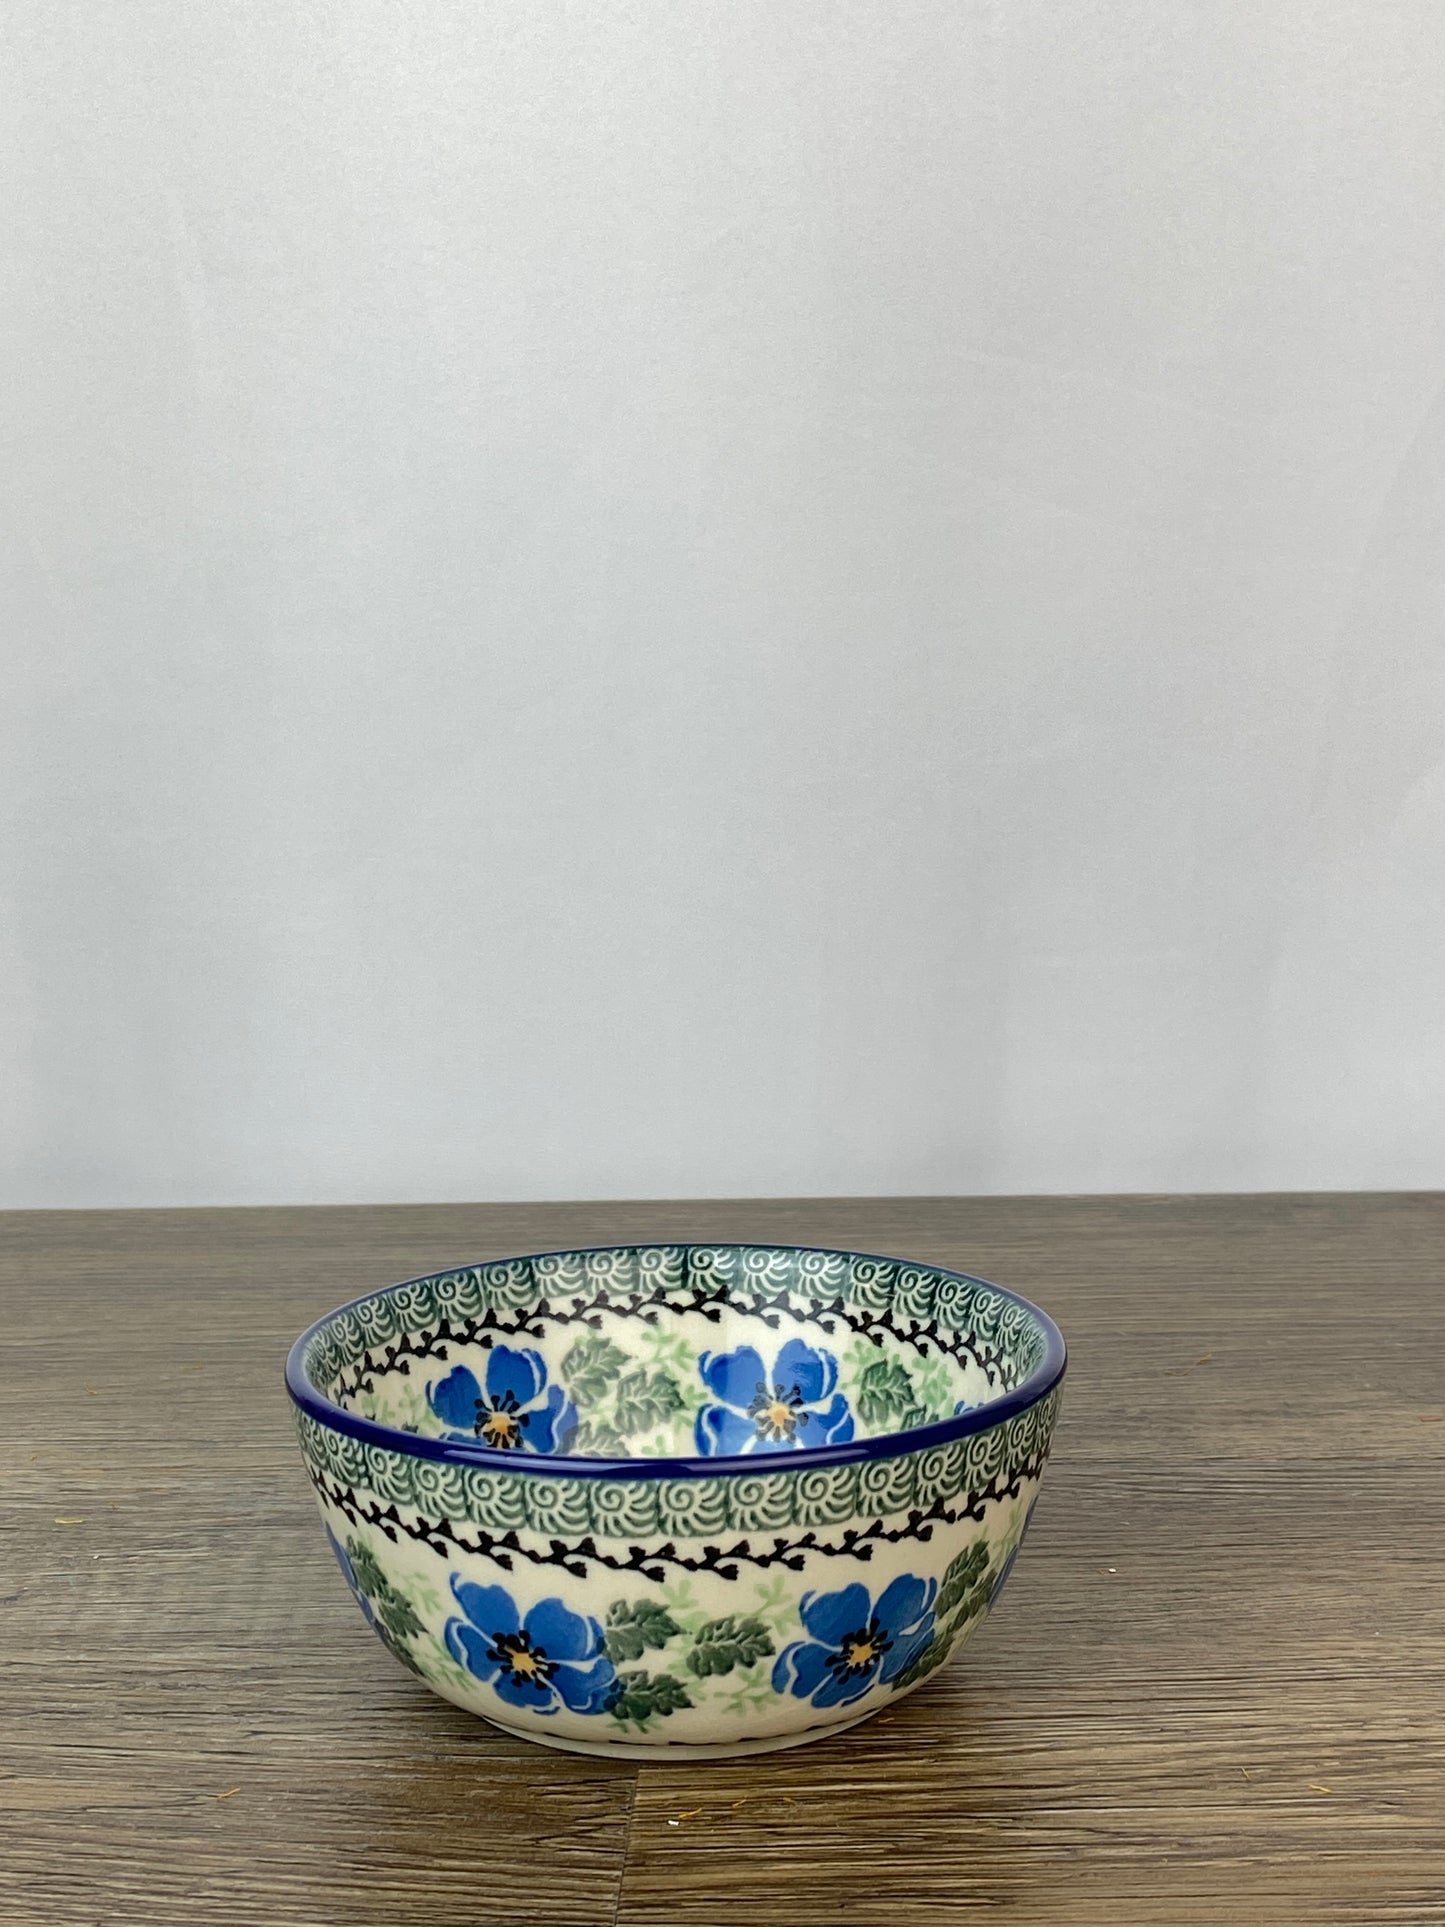 Small Cereal / Dessert Bowl - Shape 17 - Pattern 1915